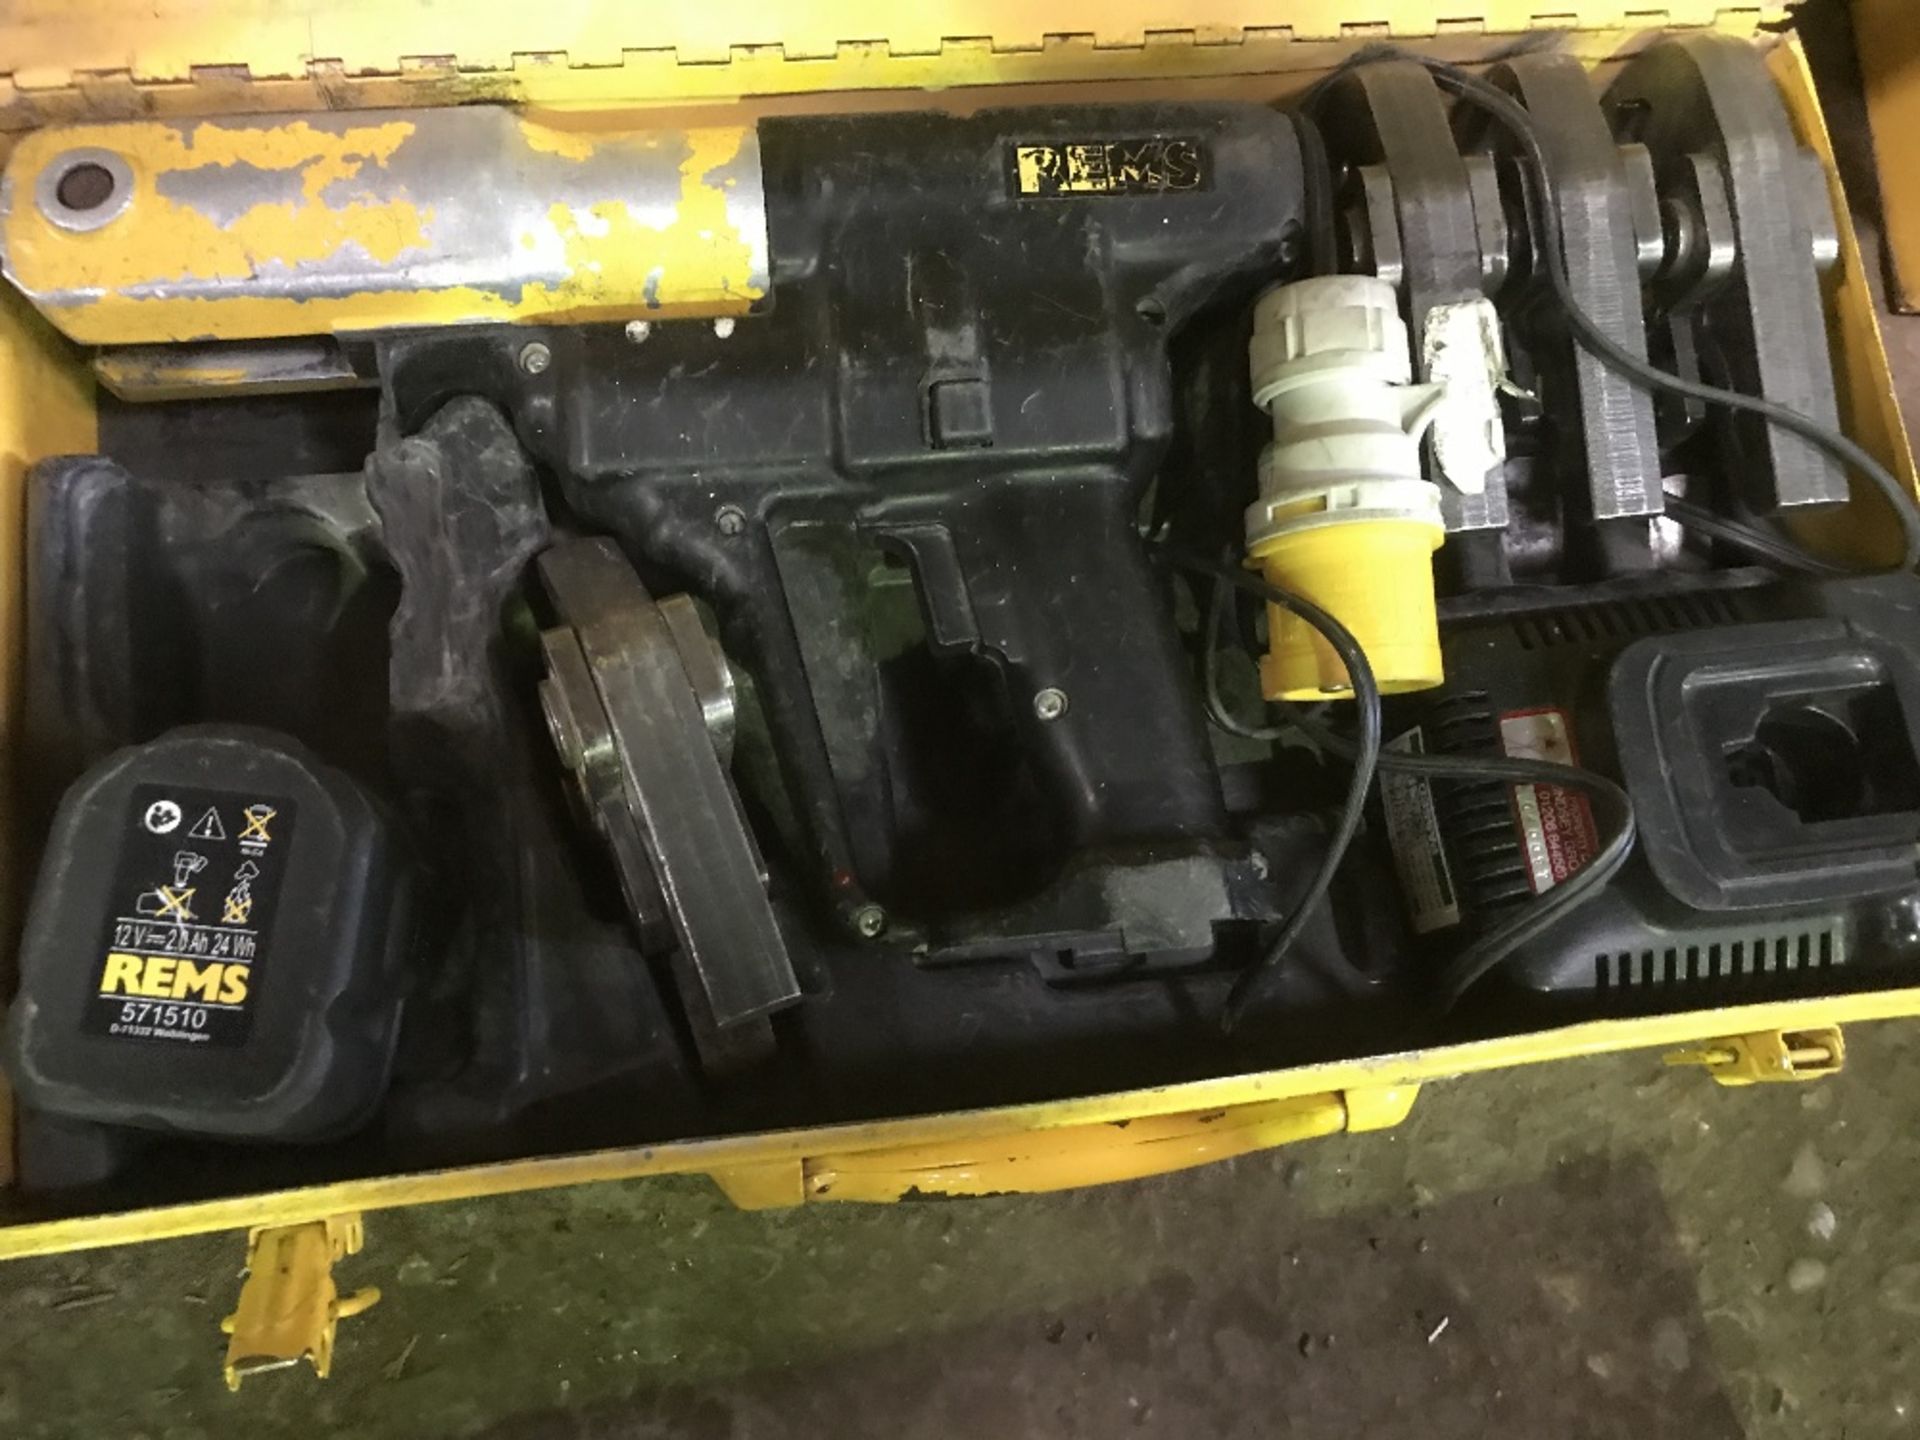 REMS BATTERY POWERED CRIMPER C/W HEADS ETC AS SHOWN IN IMAGES DIRECT FROM TRAINING SCHOOL